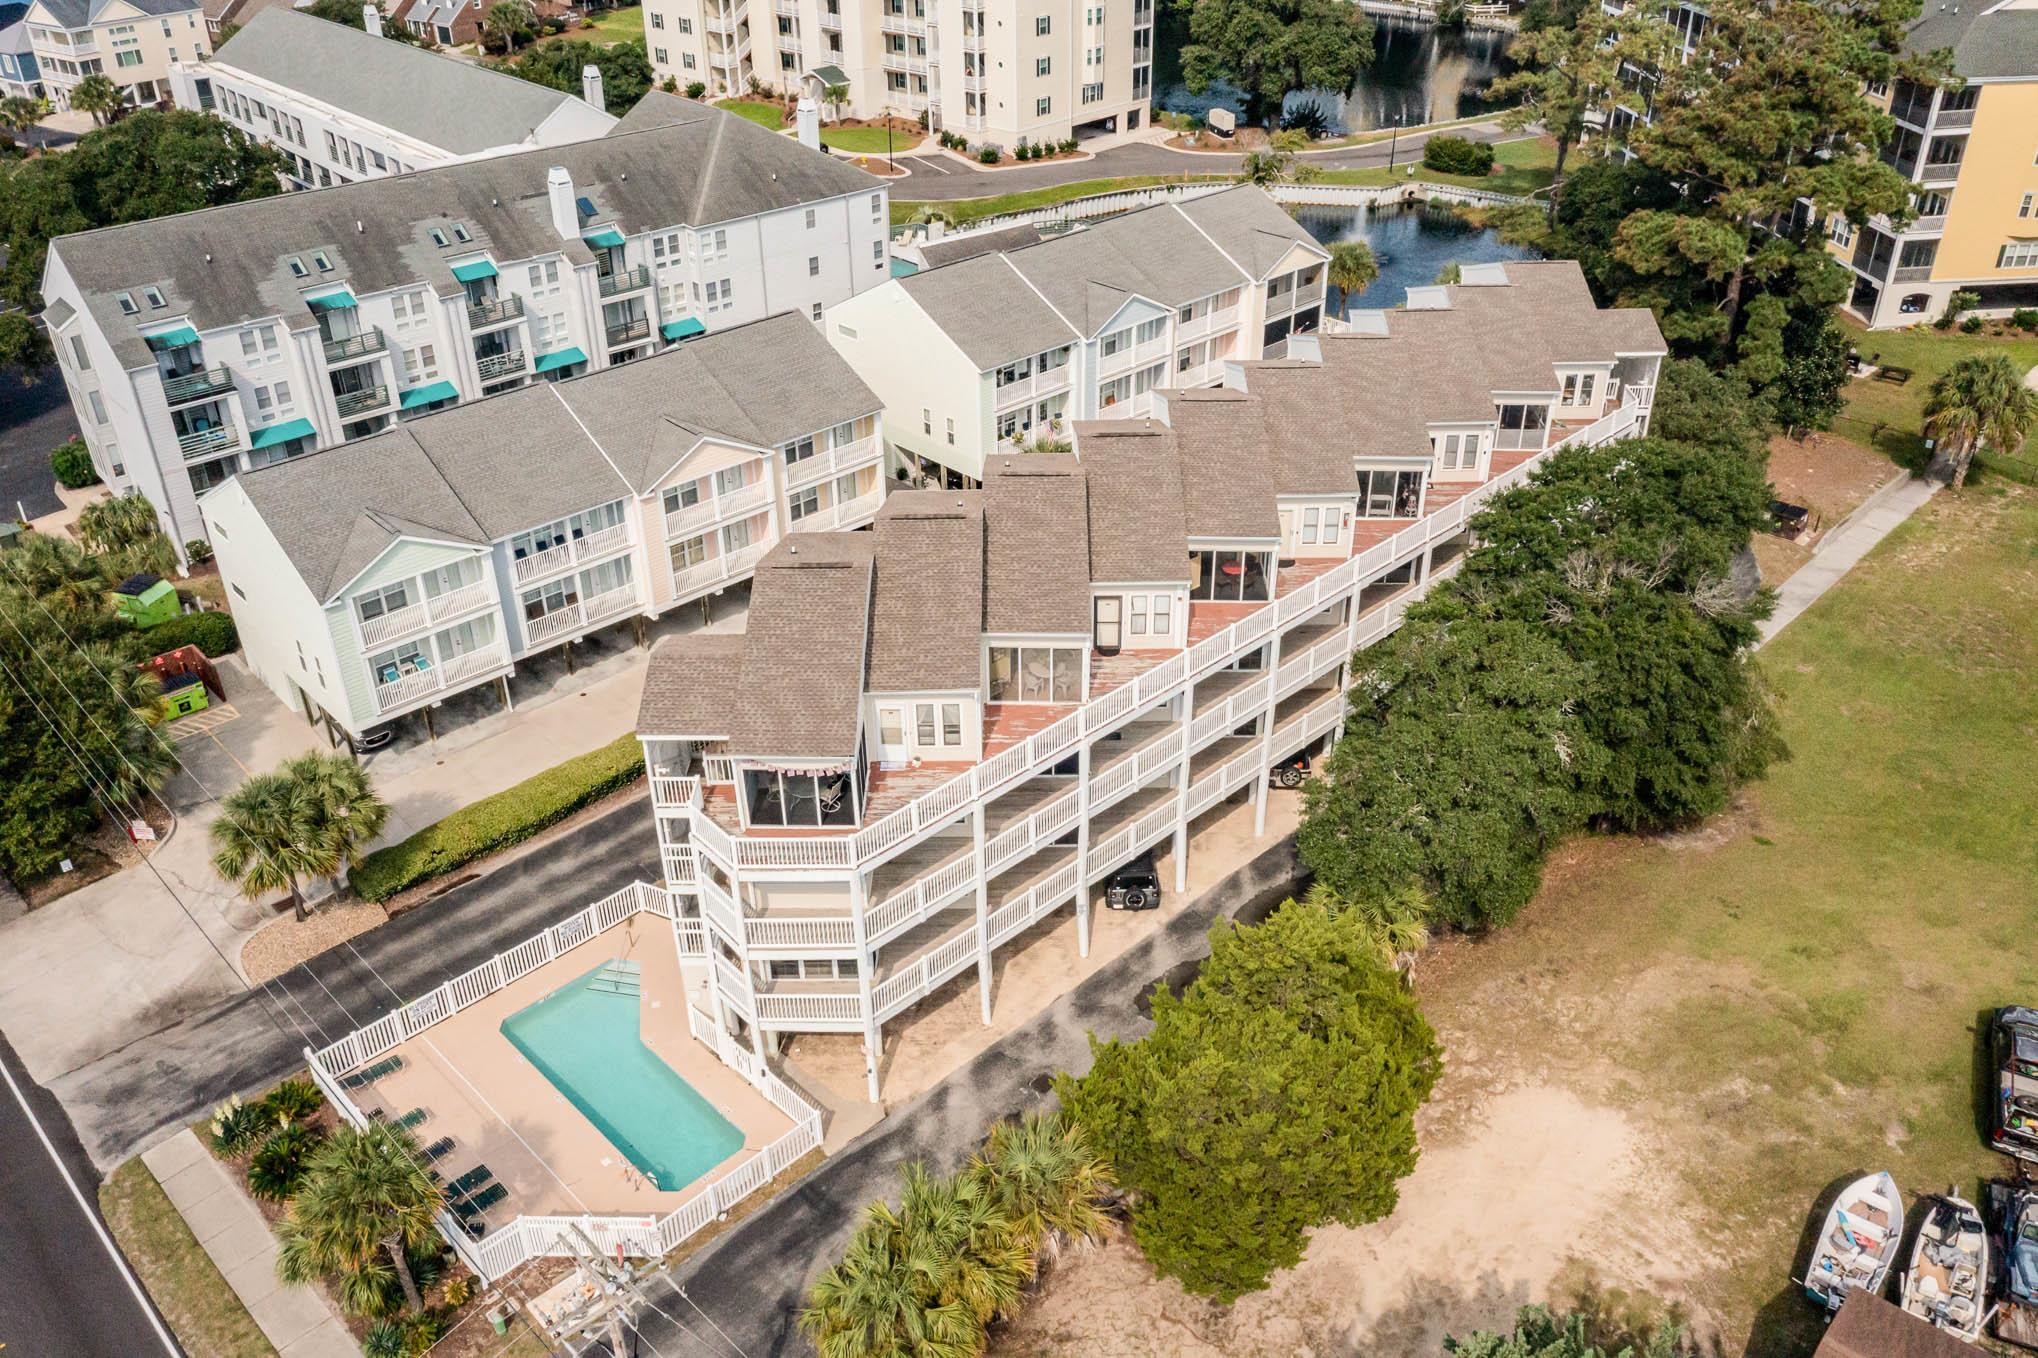 turn-key investment opportunity, walking distance to the beach, fully updated and fully furnished. this vibrant coastal 2-bedroom, 2-bathroom condo is just one block from the ocean and two blocks from main street where you can enjoy live music, shopping, dining and shagging. the condo has been beautifully updated in modern coastal fashion giving a bright and fresh feel. the kitchen has been updated with quartz countertops, bright cabinets, stainless steel appliances, and has everything you need to prepare a dining experience. the living and dining areas have plenty of seating for guests and the living room has a new queen sleeper sofa. step into the cozy bedrooms, each outfitted with new beds and mattresses, promising restful nights and rejuvenating mornings. both bedrooms have ensuite bathrooms with tub/shower combos and both share a balcony where you can enjoy an evening cocktail. convenience is paramount with a washer/dryer combo conveniently located within the unit. plus, the complex amenities include a refreshing pool, perfect for cooling off on warm coastal afternoons. don't miss your opportunity to experience coastal living at its finest – schedule your private showing today and make this turnkey paradise your own coastal retreat or investment property.